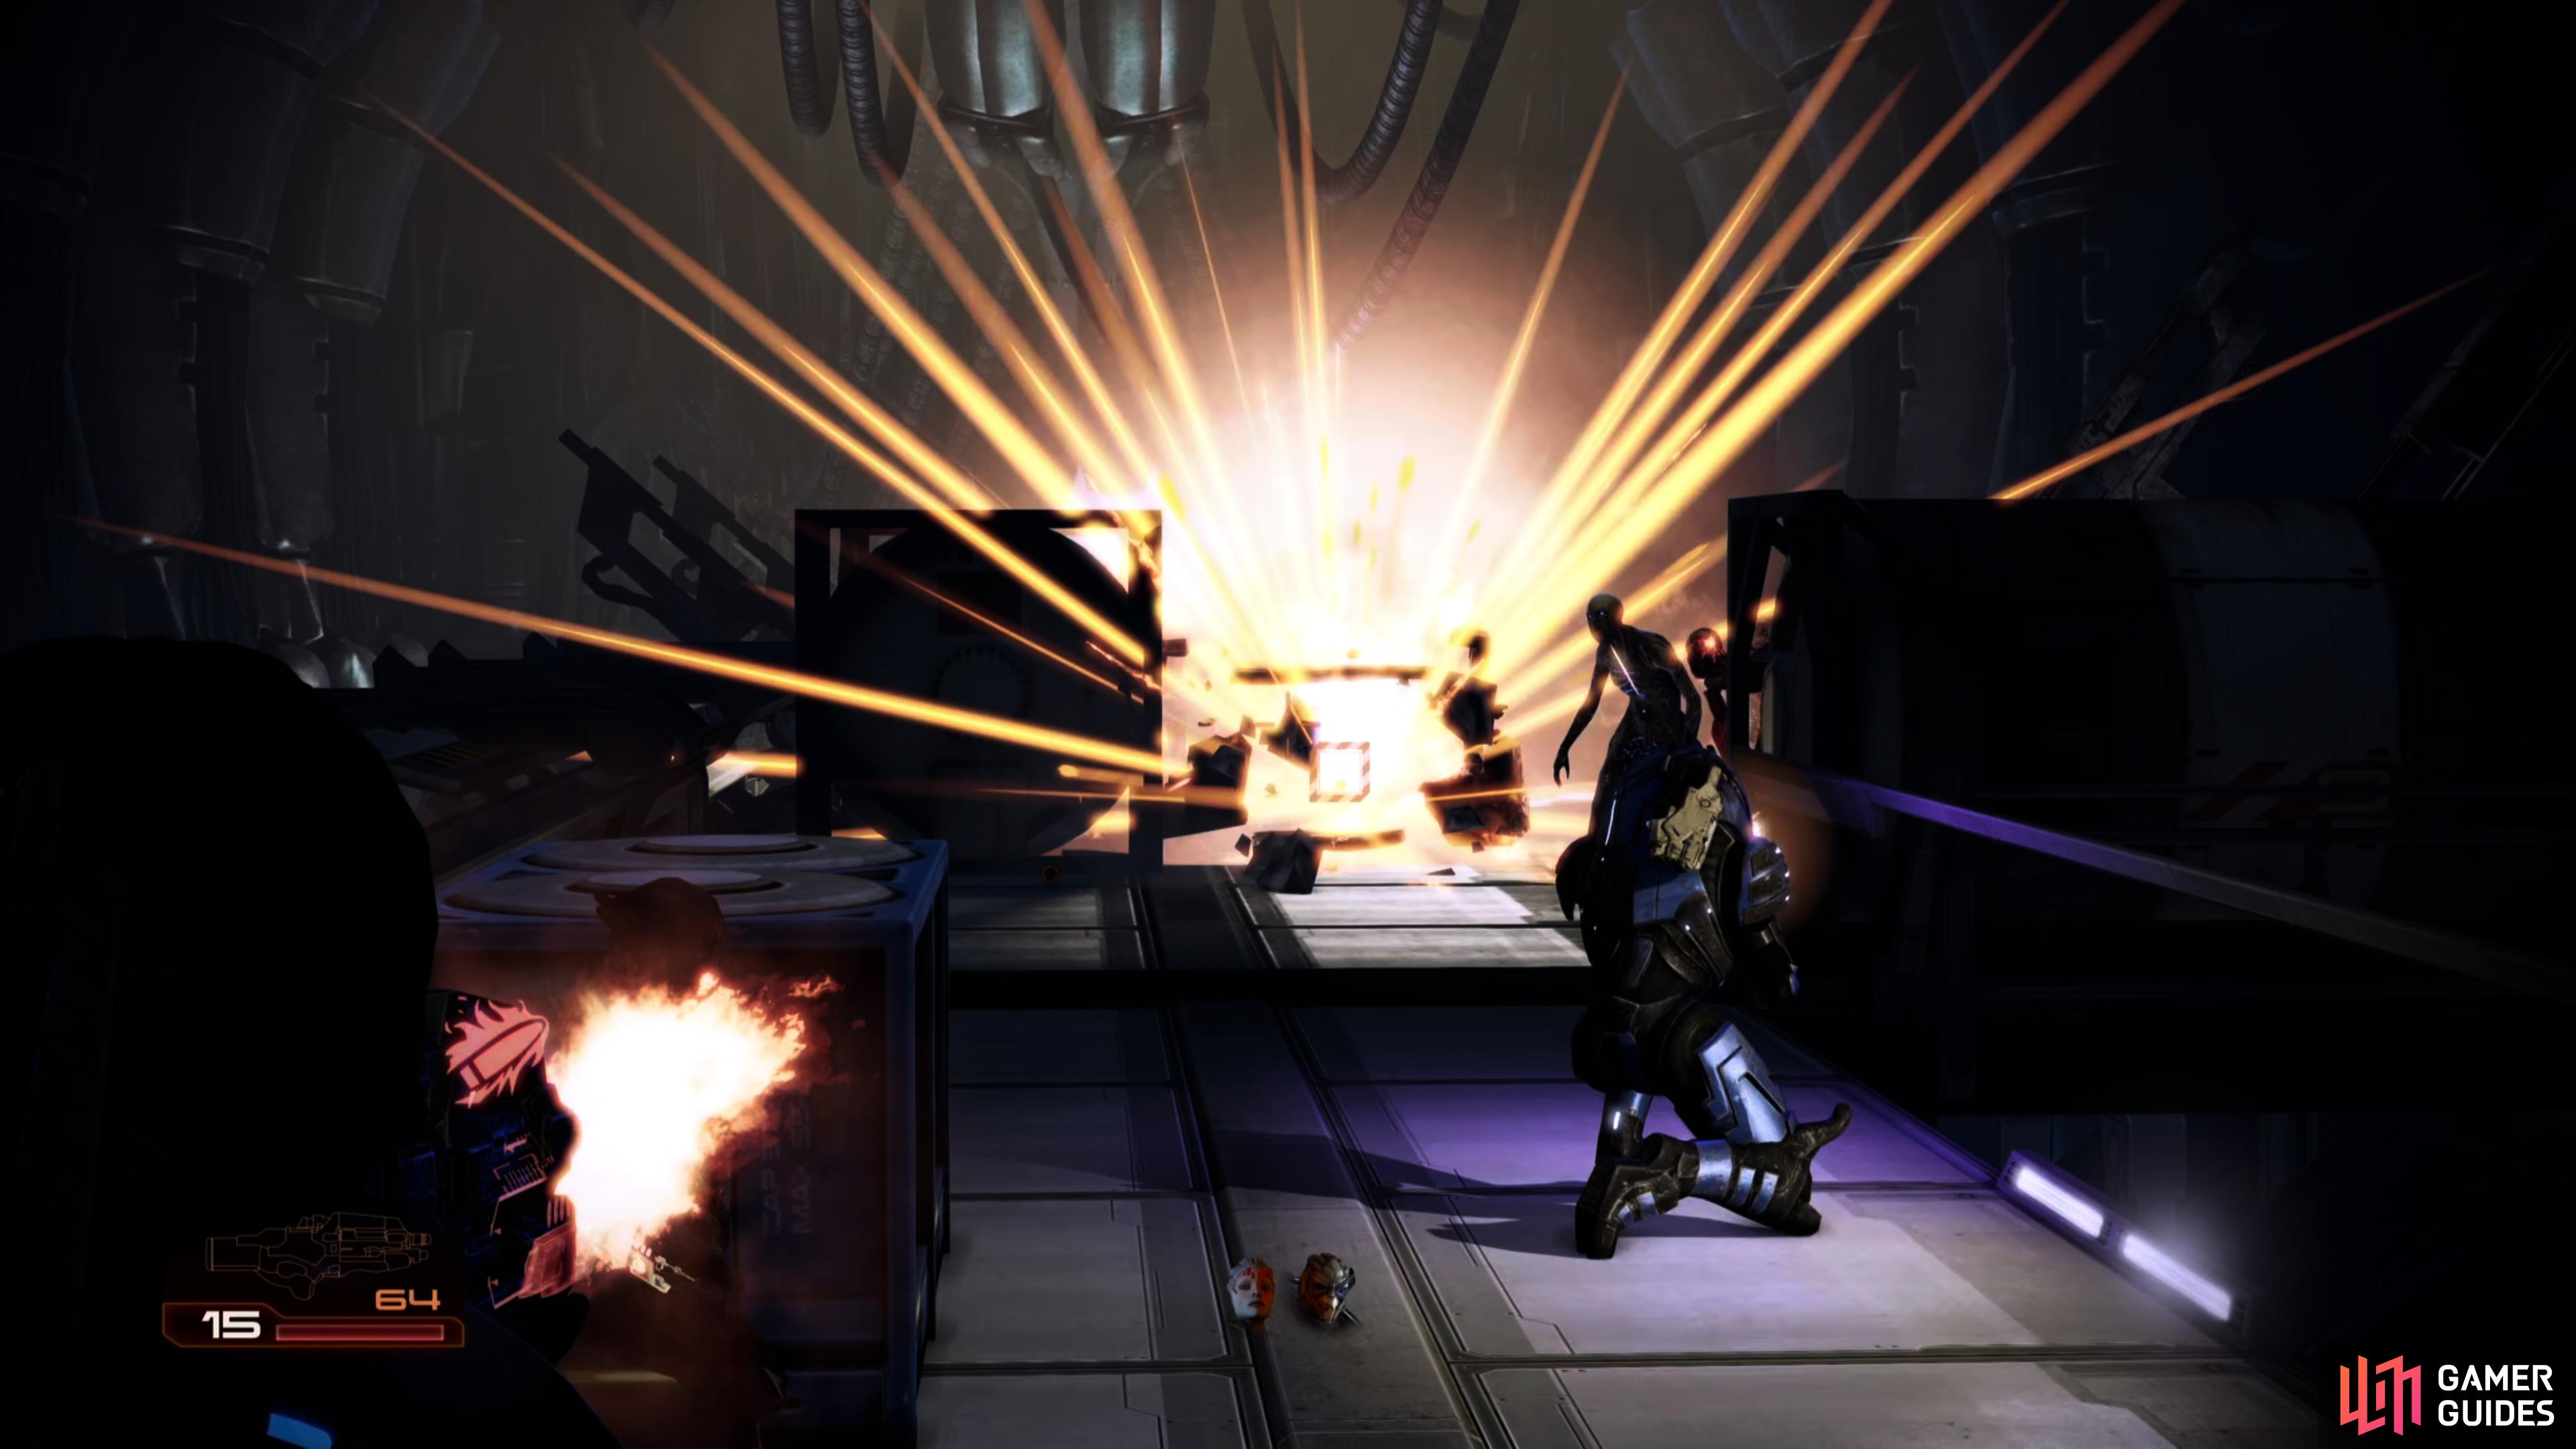 The derelict Reaper is full of explosive crates you can use against your foes,